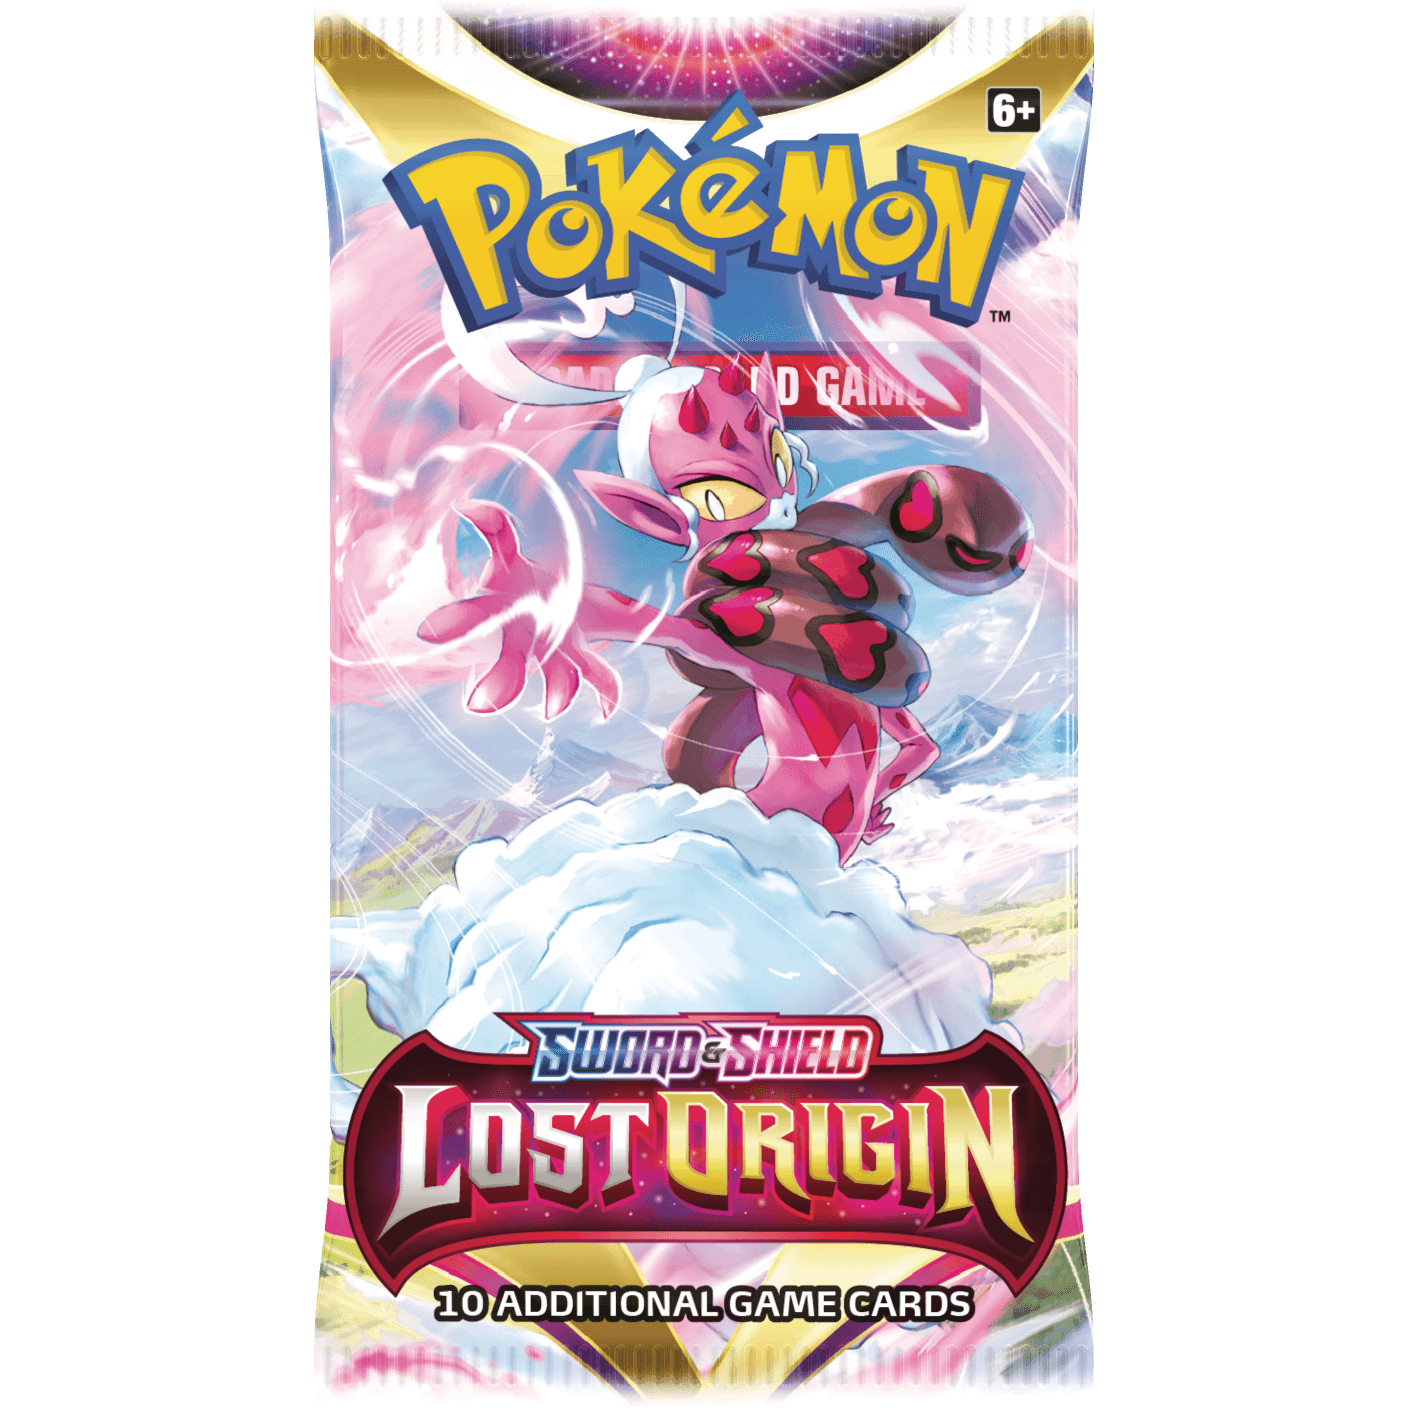 Pokemon Trading Cards Set of 10 Cards - Sword and Shield Lost Origin (Random Style) - BumbleToys - 14 Years & Up, 6+ Years, 8-13 Years, Boys, Card & Board Games, Pokémon, Puzzle & Board & Card Games